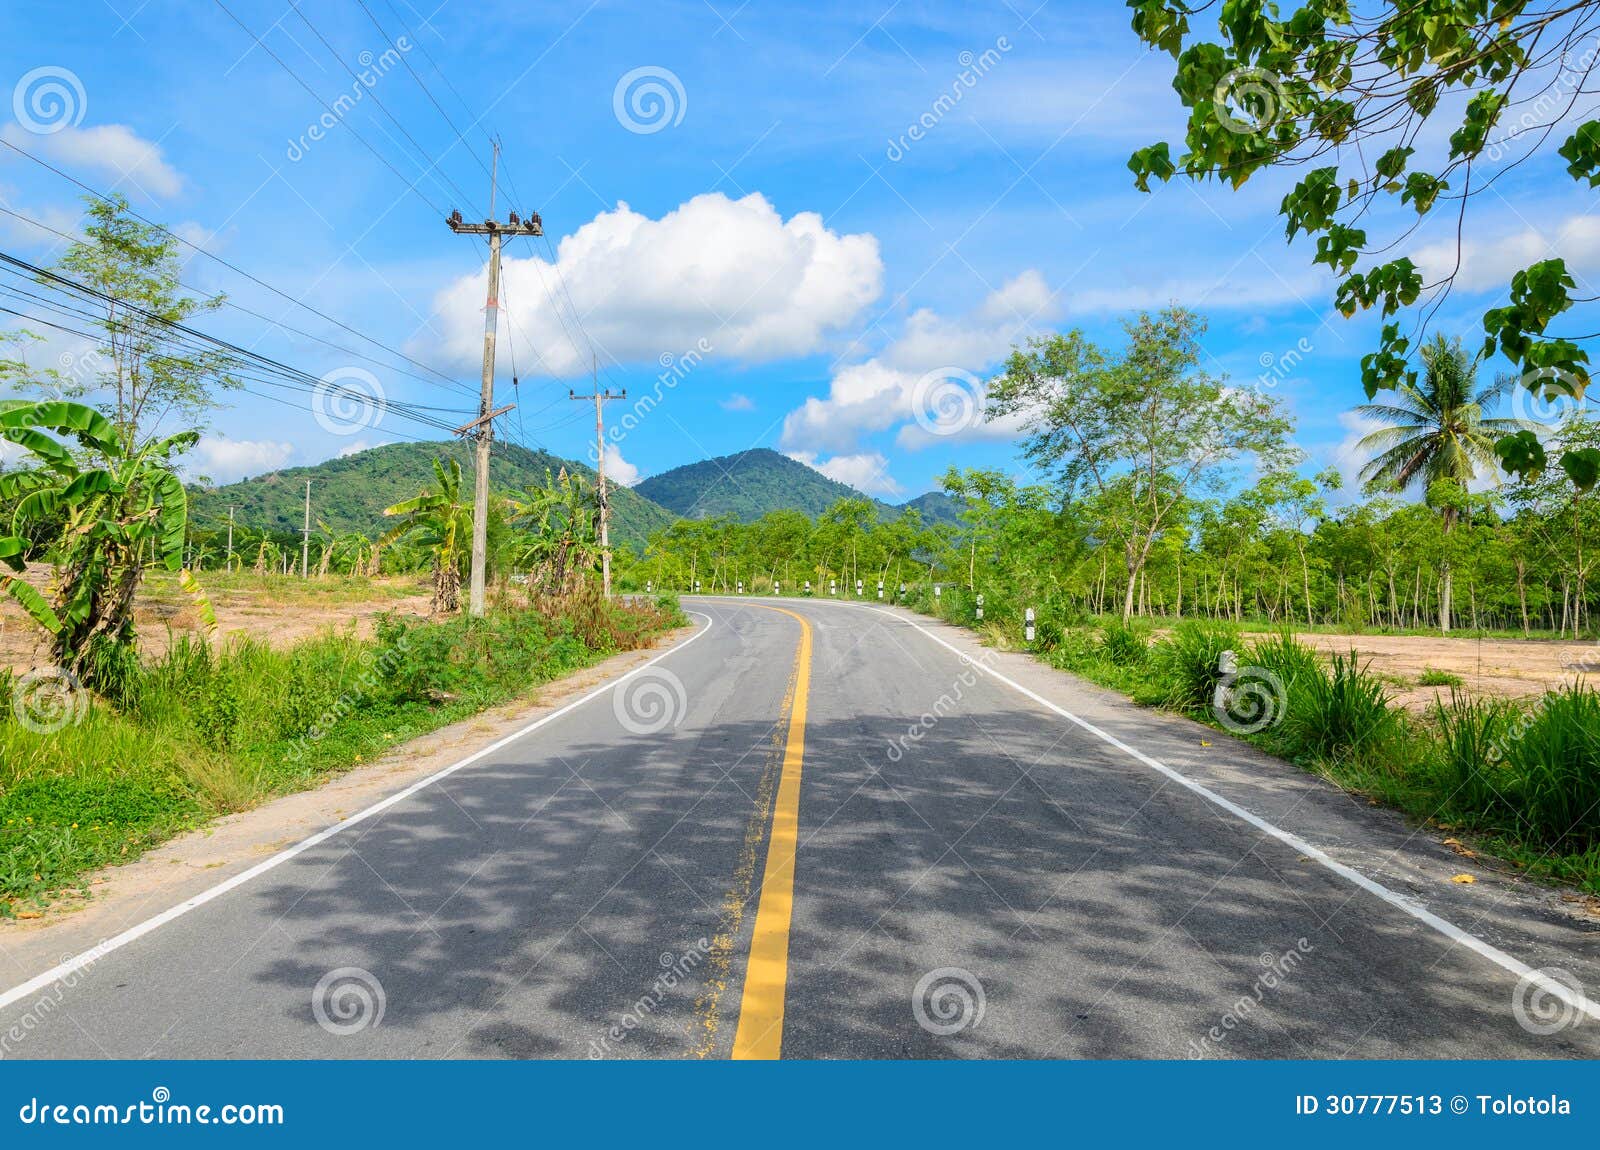 Road with Blue Sky Background Stock Image - Image of concept, empty:  30777513